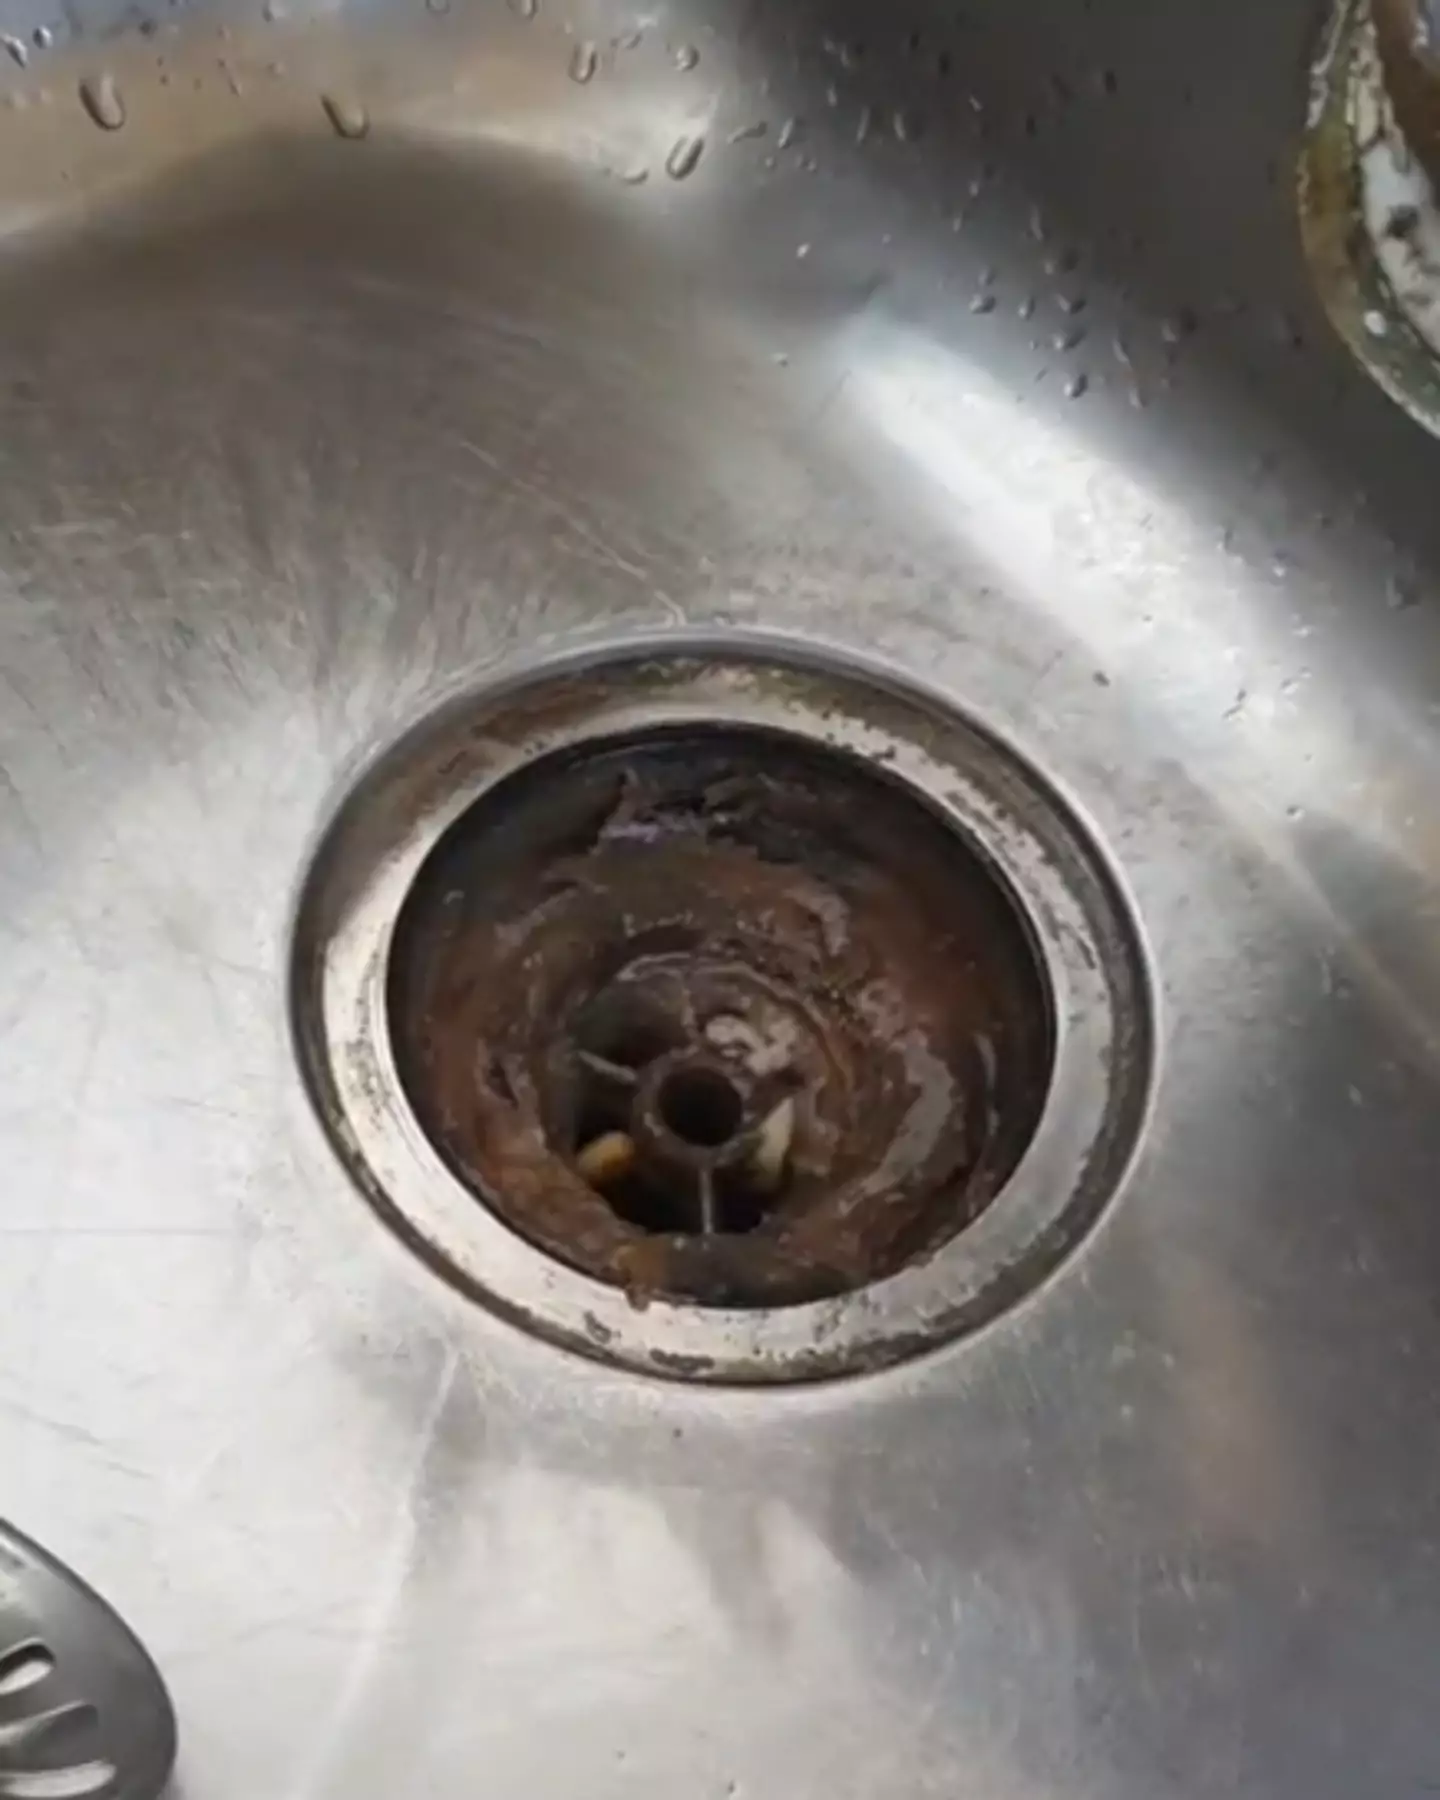 The sink was disgusting, with the content creator also describing the bad smell.